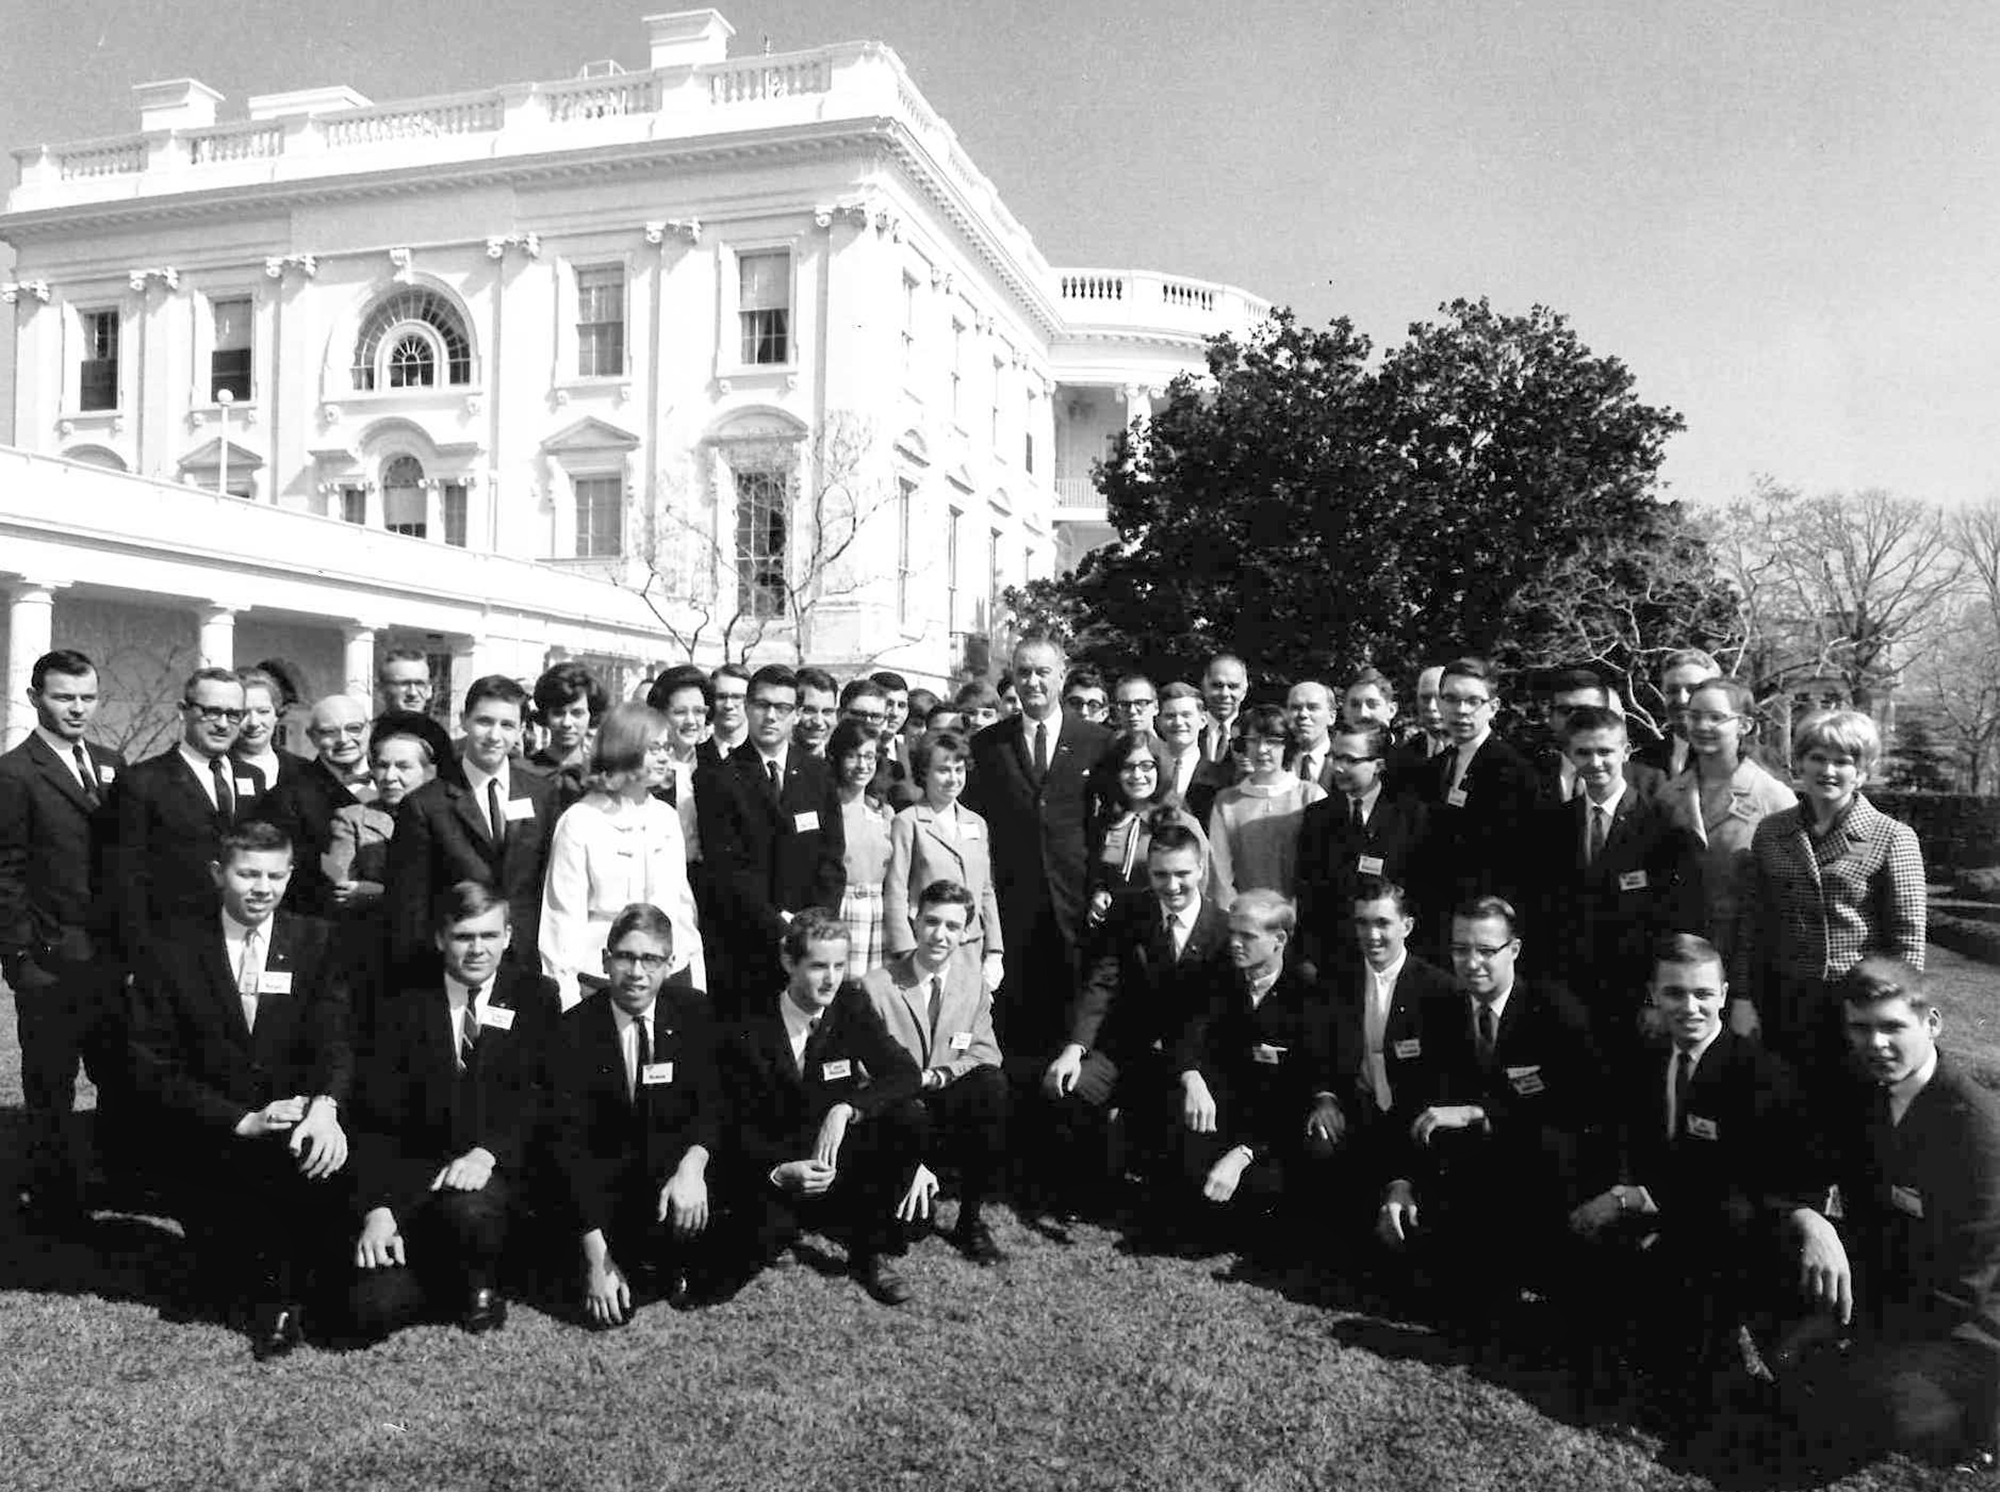 STS finalists meet President Johnson at the White House 